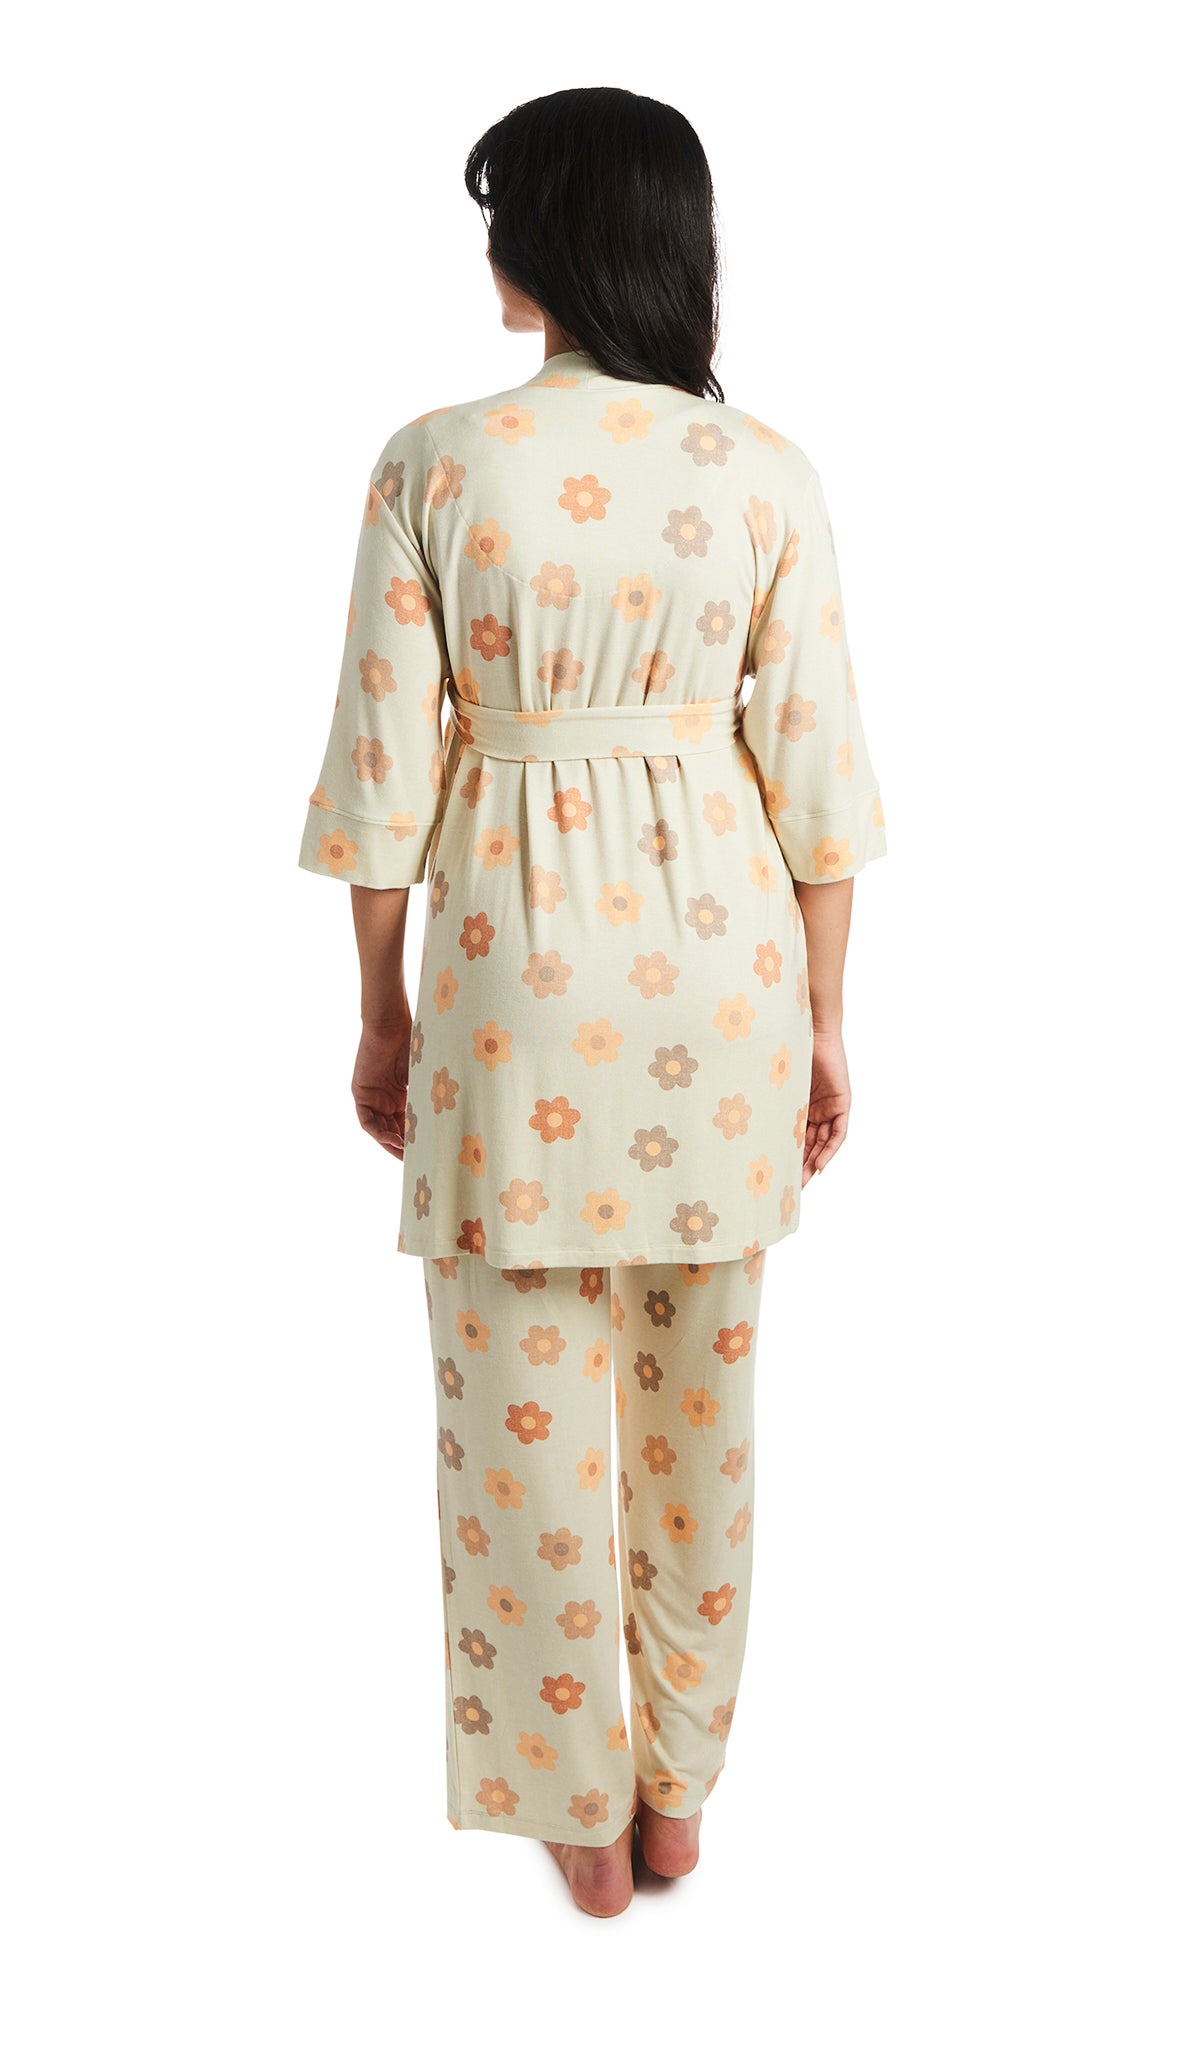 Daisies Analise 3-Piece Set, back shot of woman wearing robe and pant.